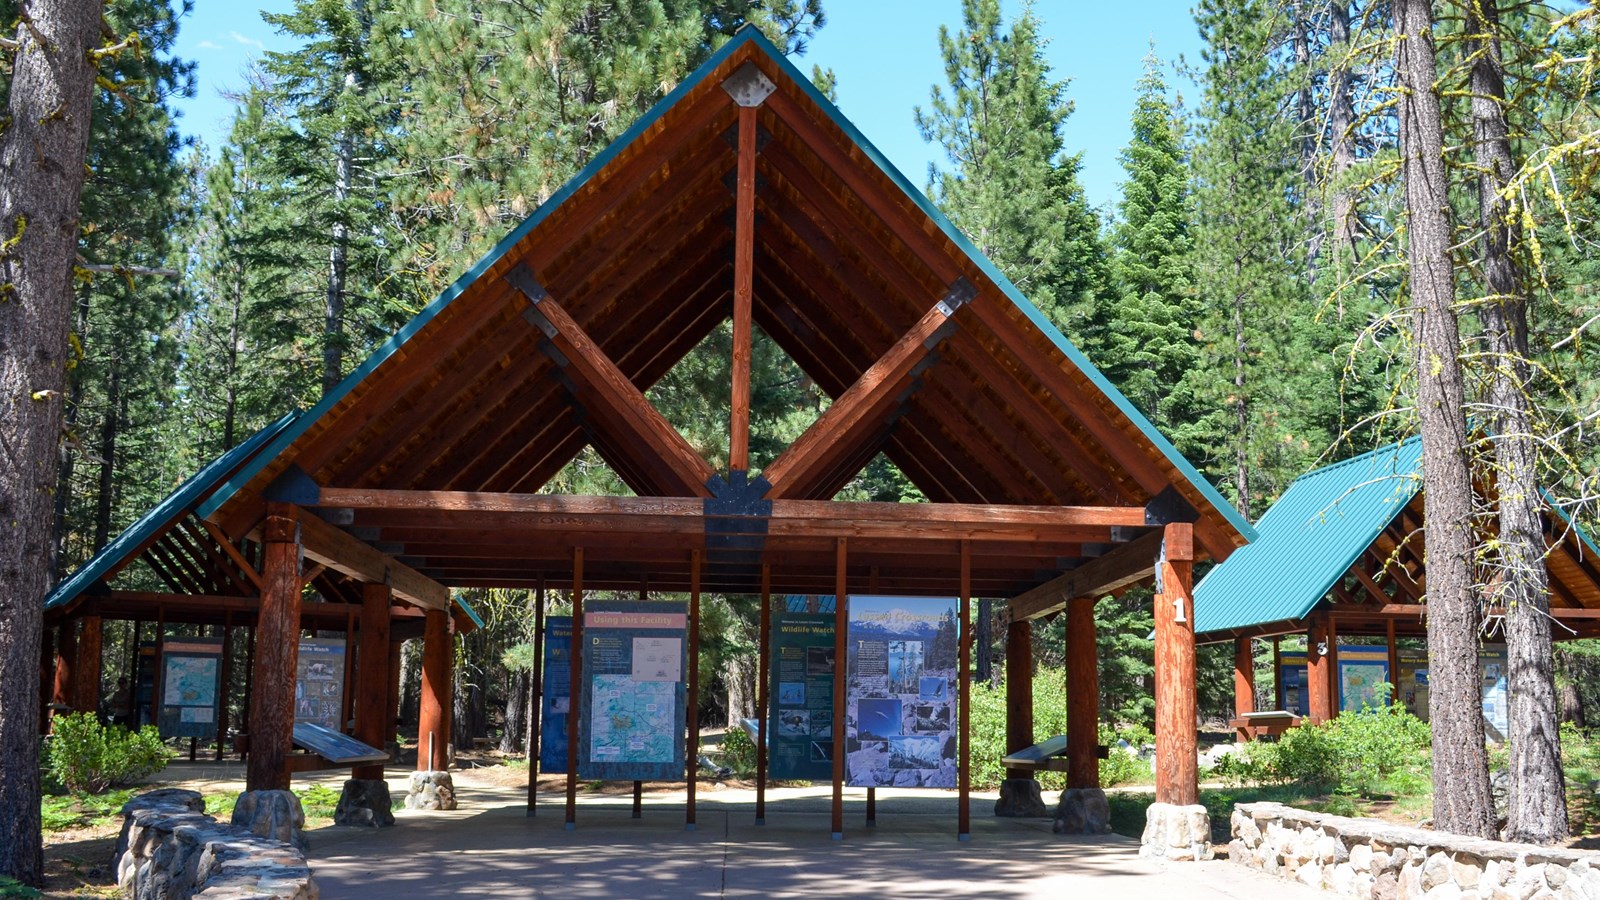 A color photo of three covered information pavilions amid conifer forests.